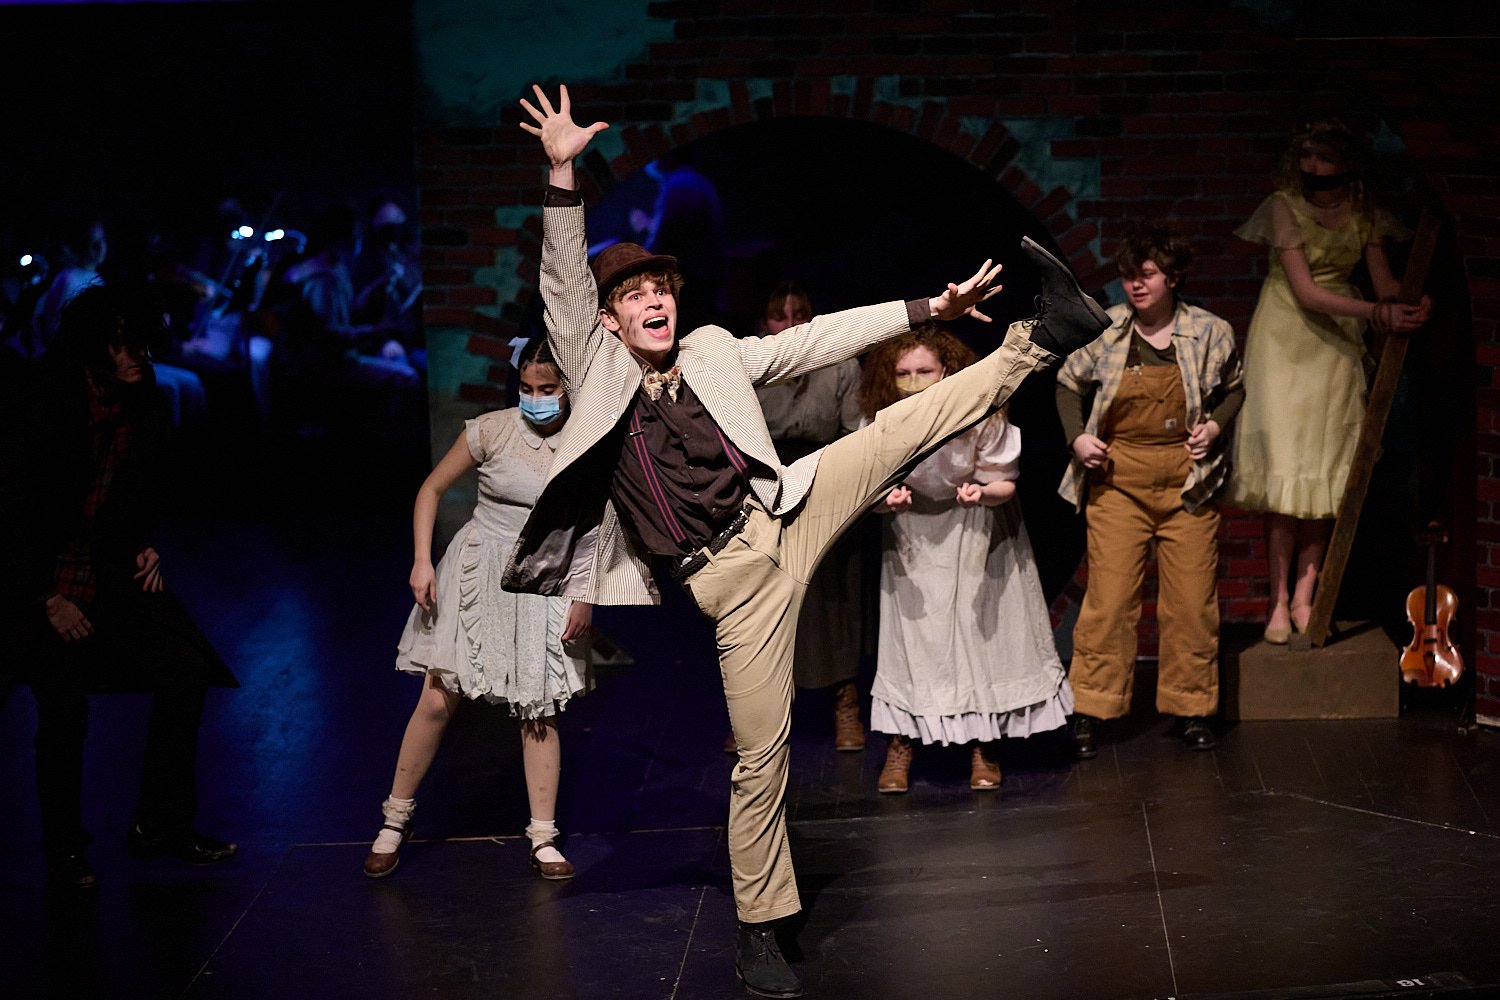  SEWICKLEY, PA, USA - MARCH 2ND 2022: High School students of Sewickley Academy are performing in an annual musical show “Urinetown” running on March 3rd-5th 2022. Max Peluso 